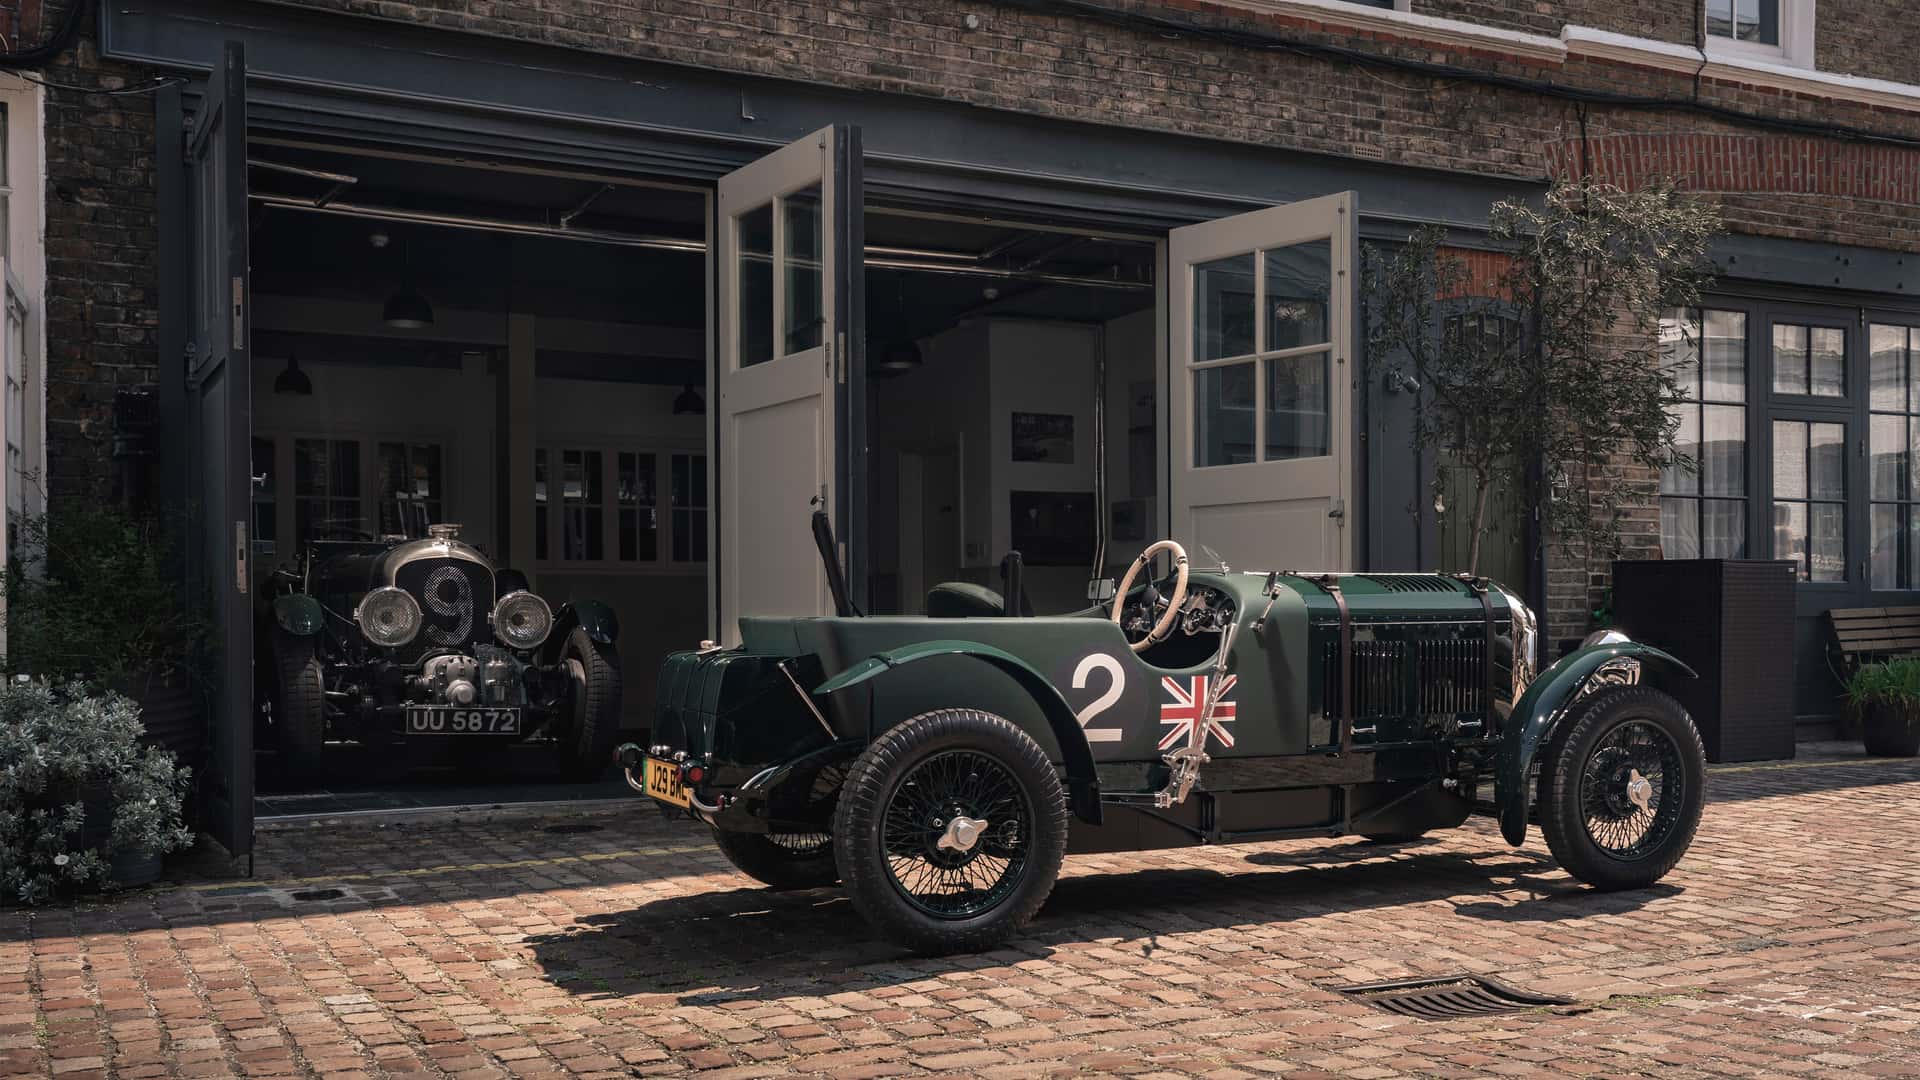 1929 blower bentley reborn as 85 percent scale ev by the little car company